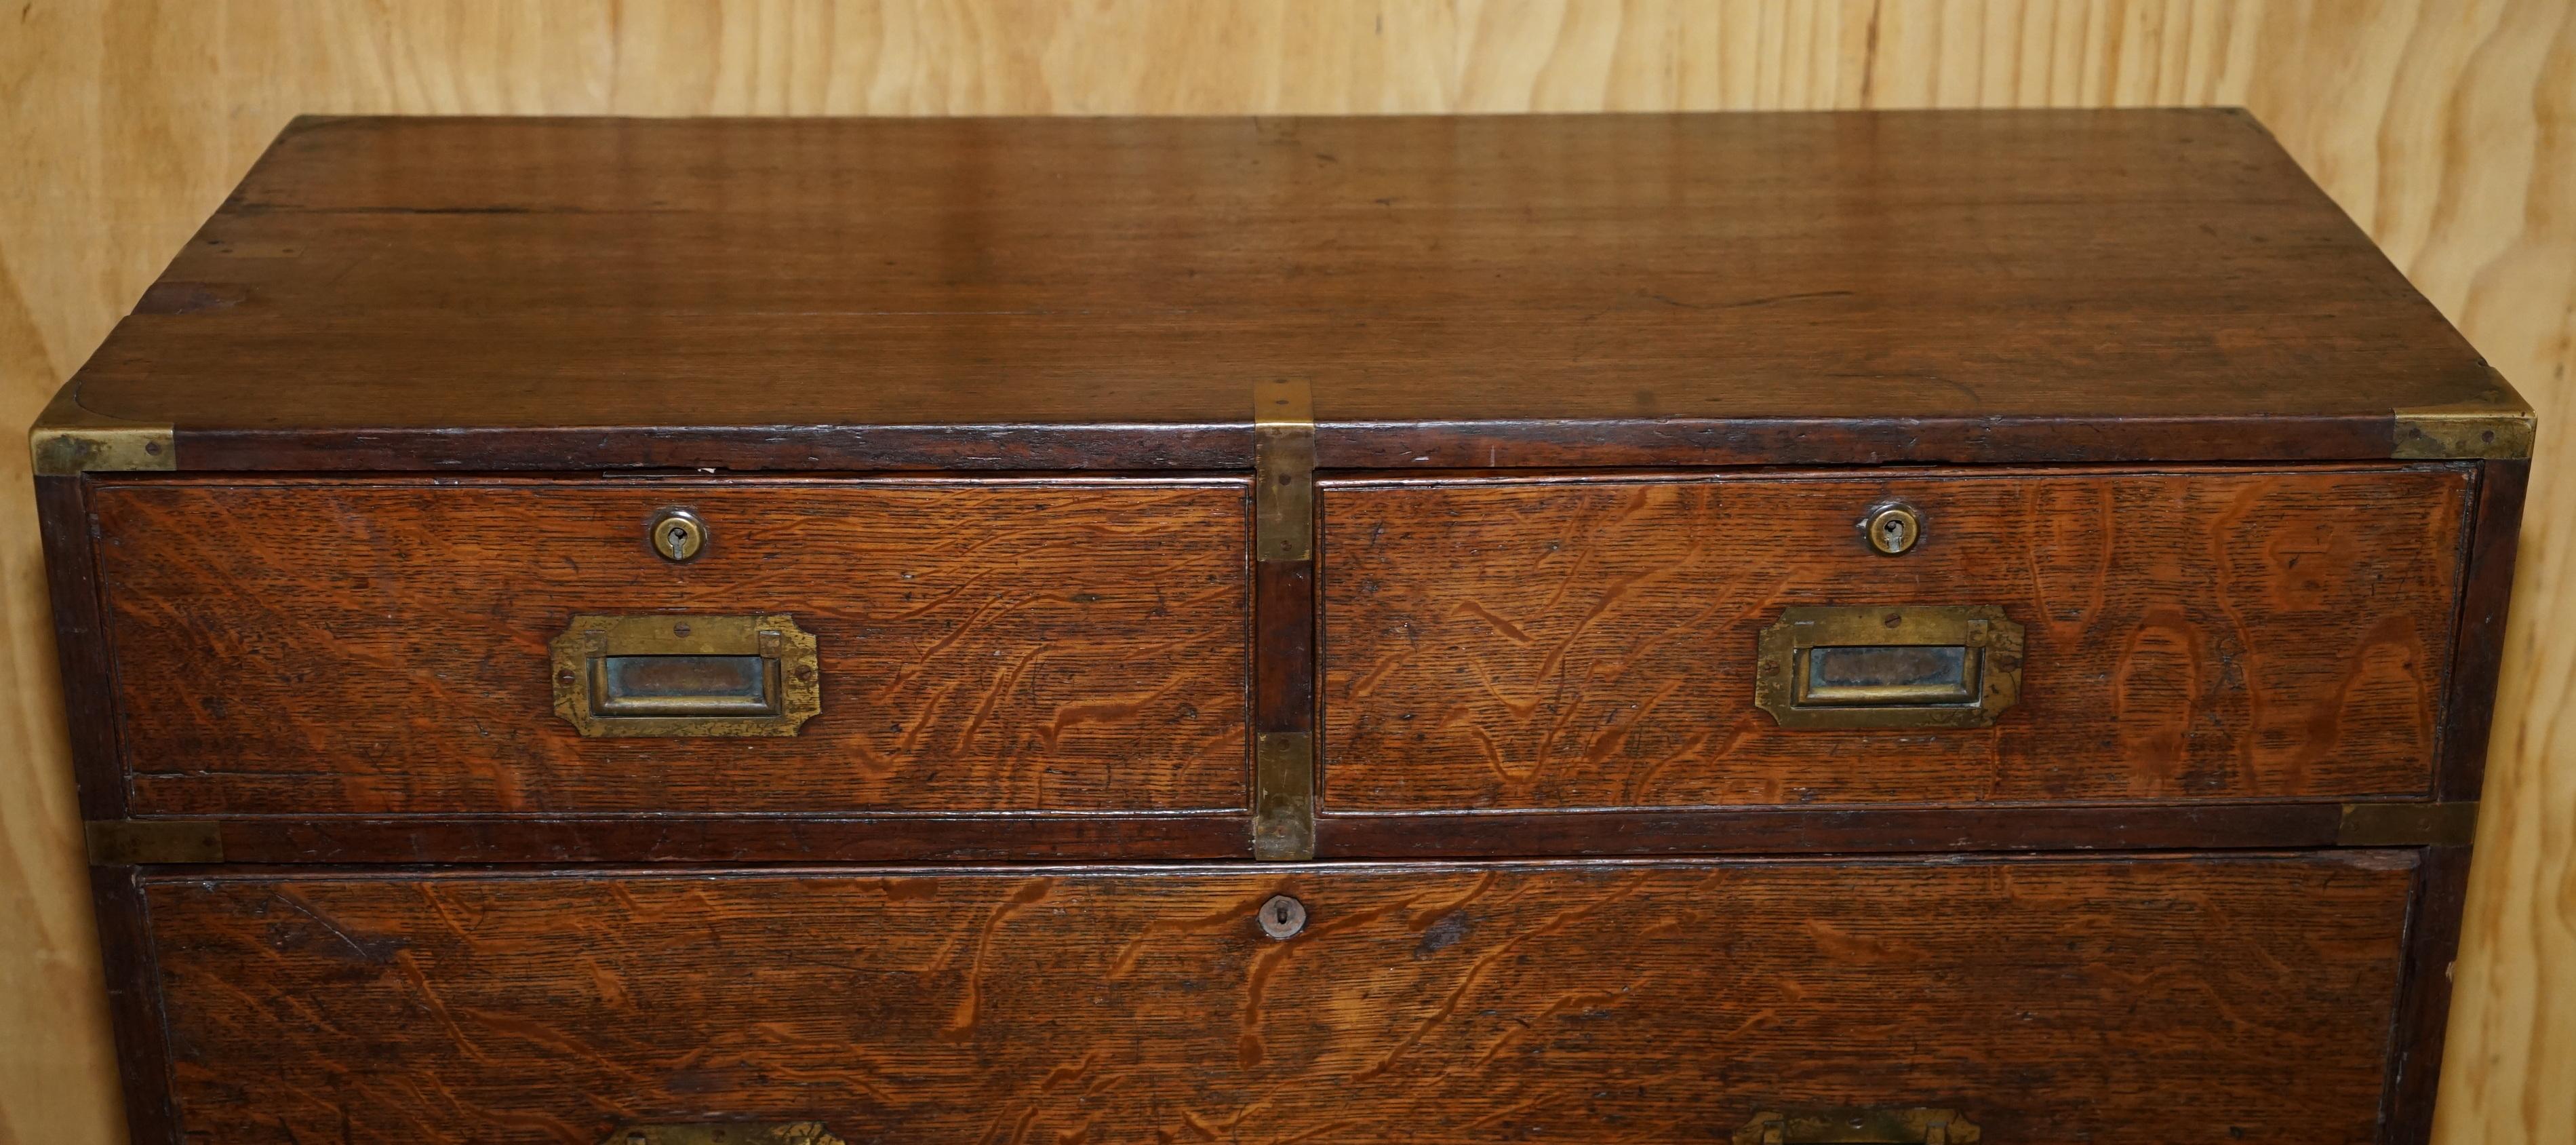 Late 19th Century Rare Distressed circa 1880 English Oak Military Campaign Used Chest of Drawers